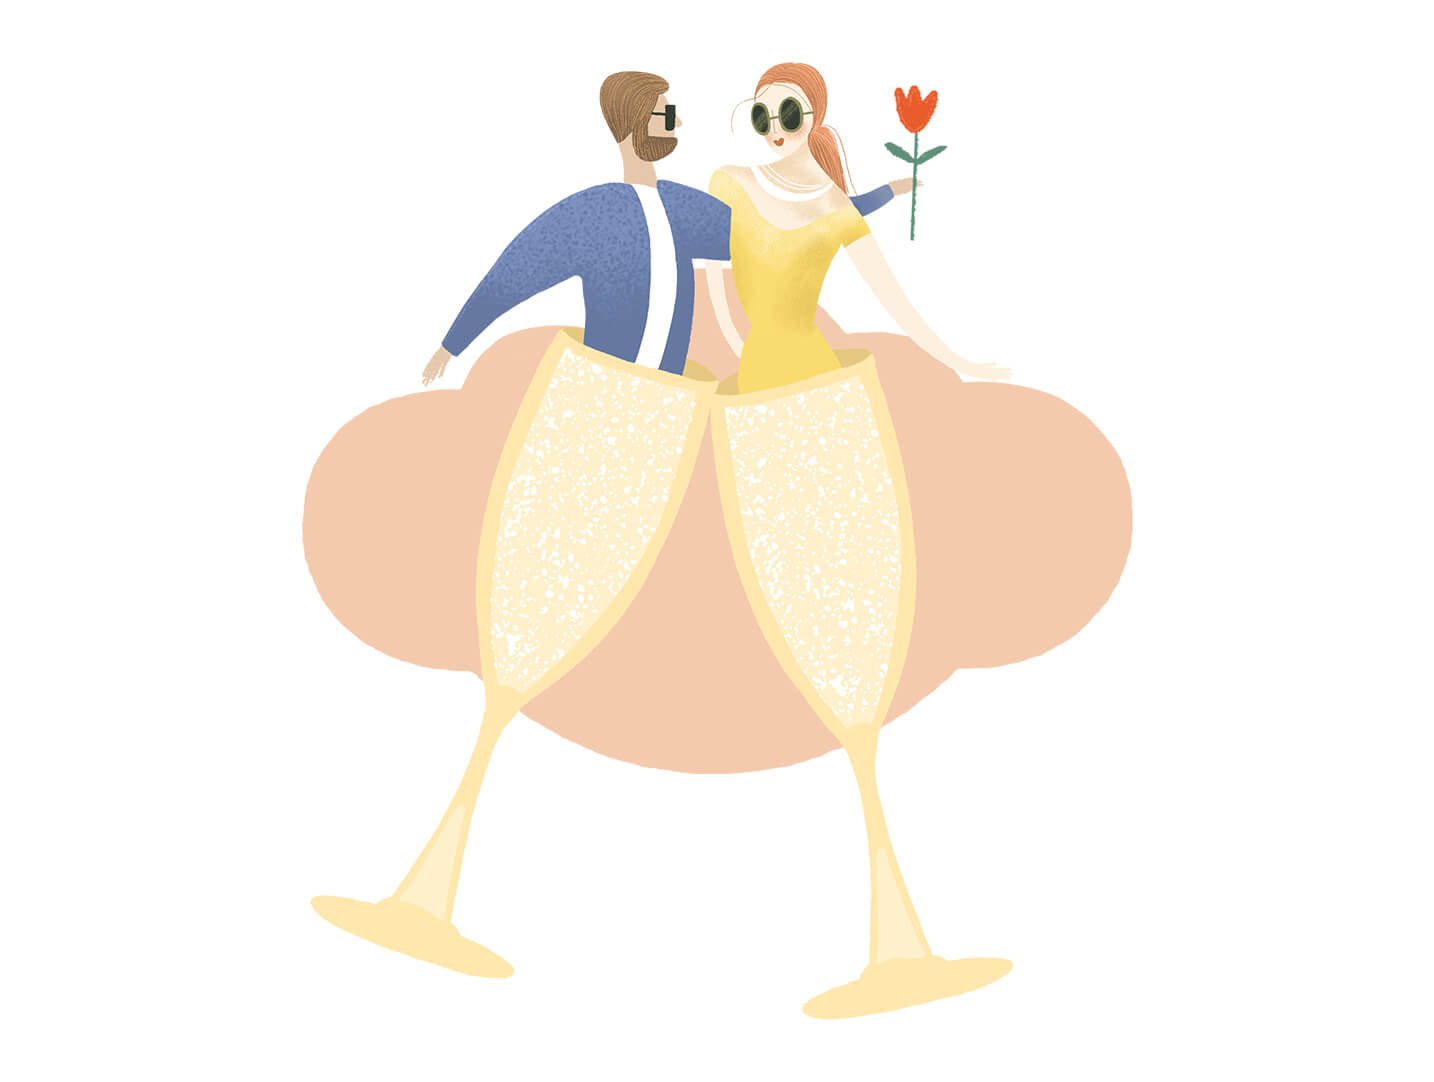 Illustration of a man and woman bursting out of champagne glasses. Featuring Sant Ambroeus